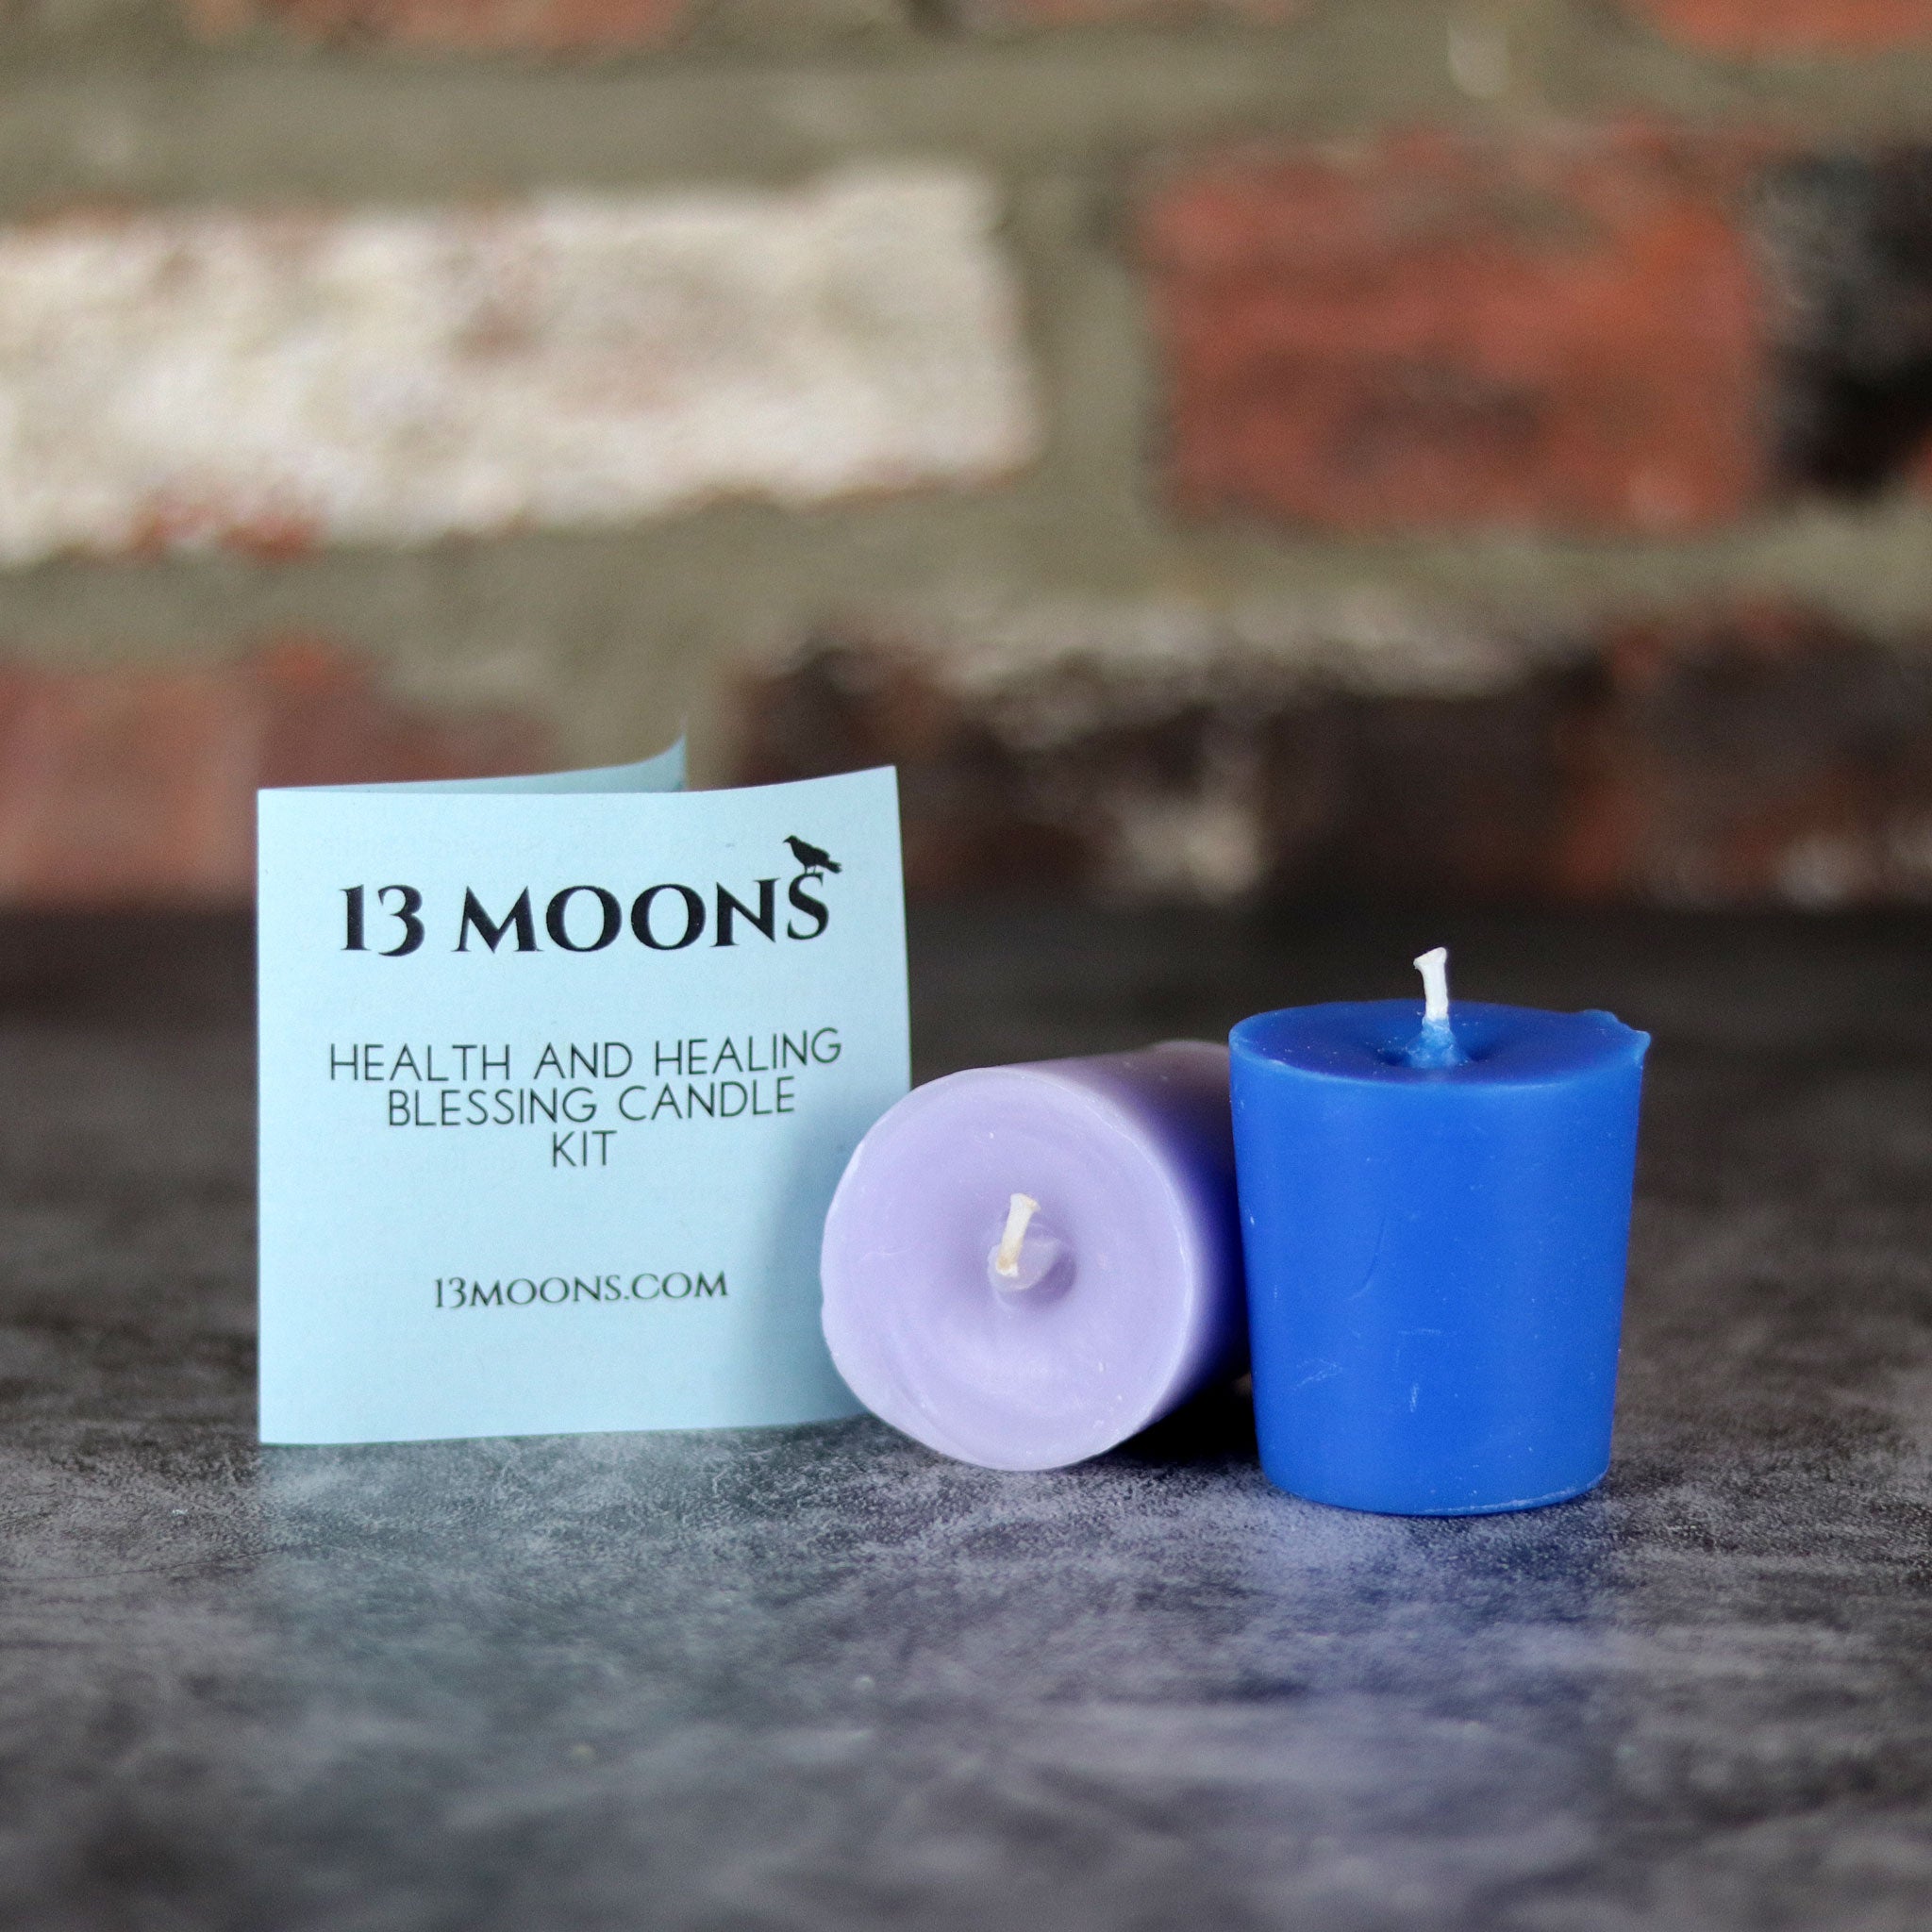 13 Moons' Health and Healing Blessing Candle Kit